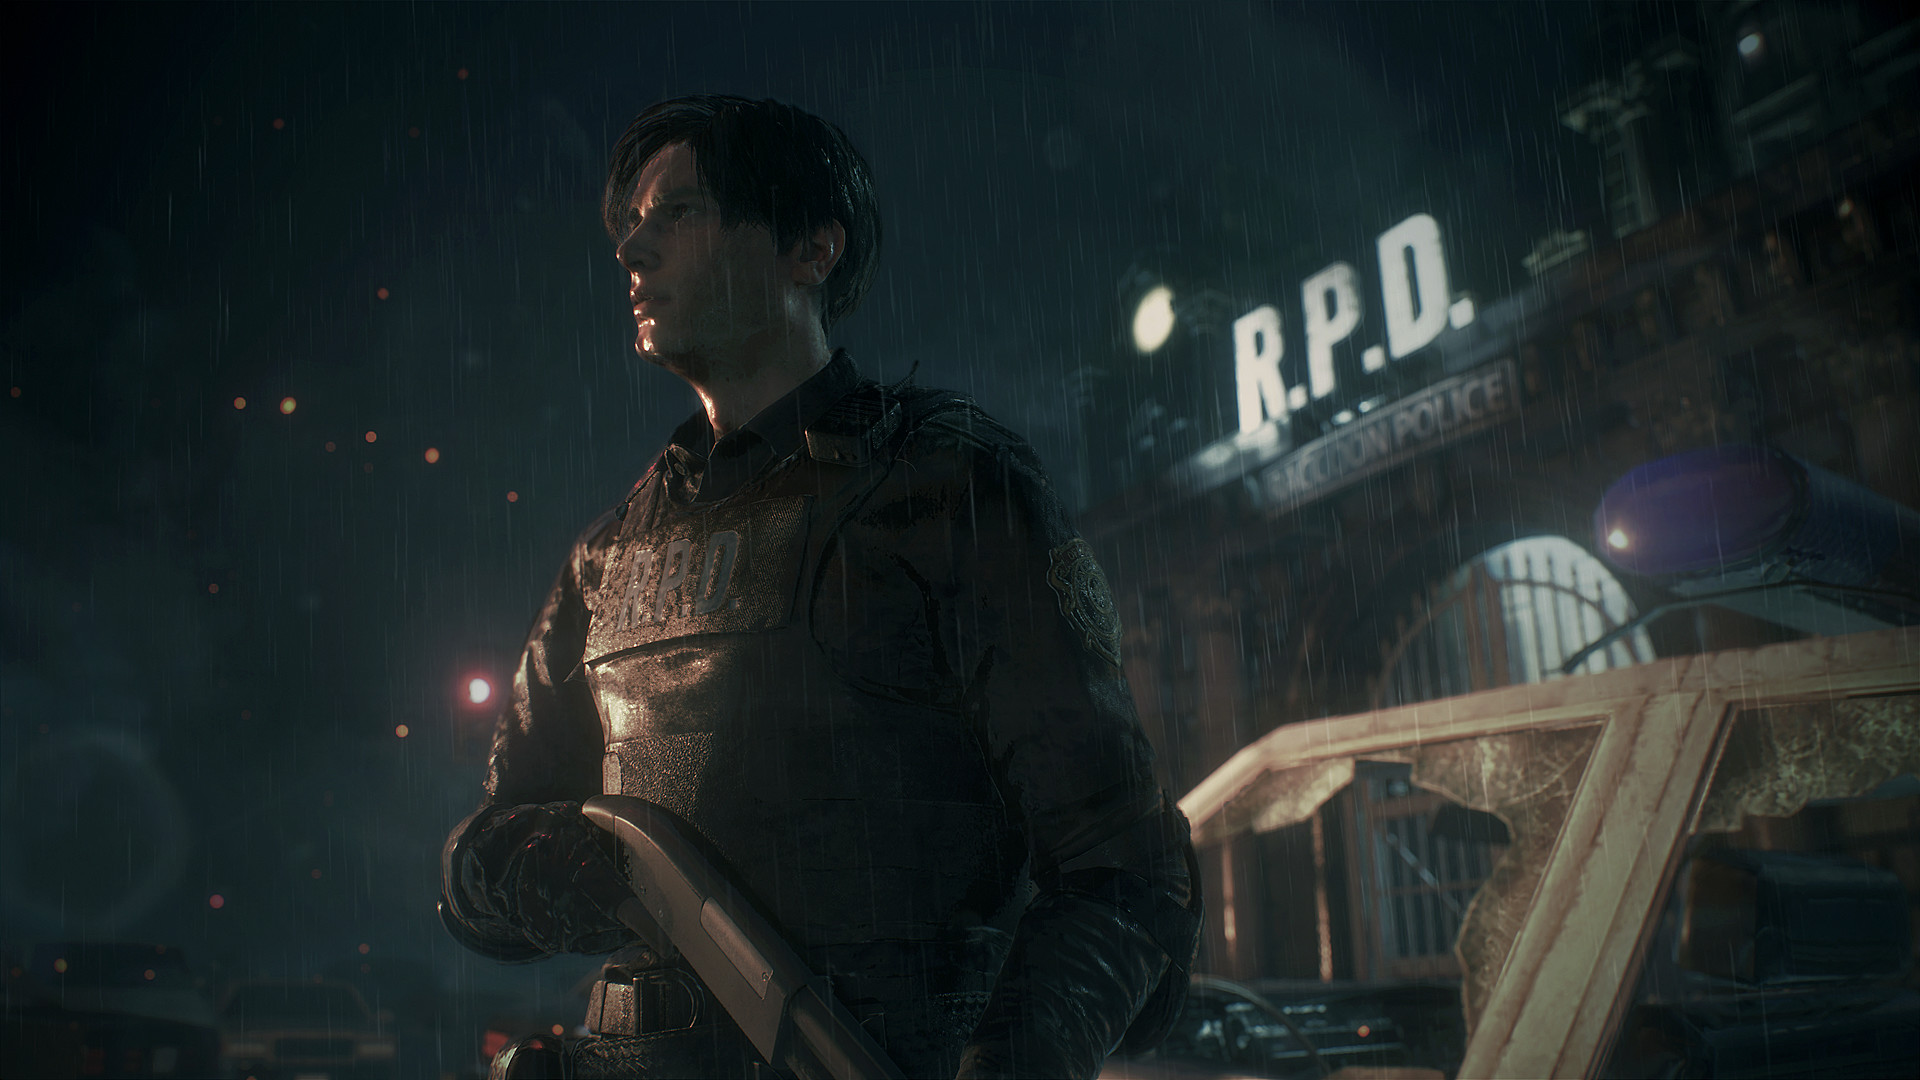 Resident Evil 3 Remake will be using the Denuvo anti-tamper tech